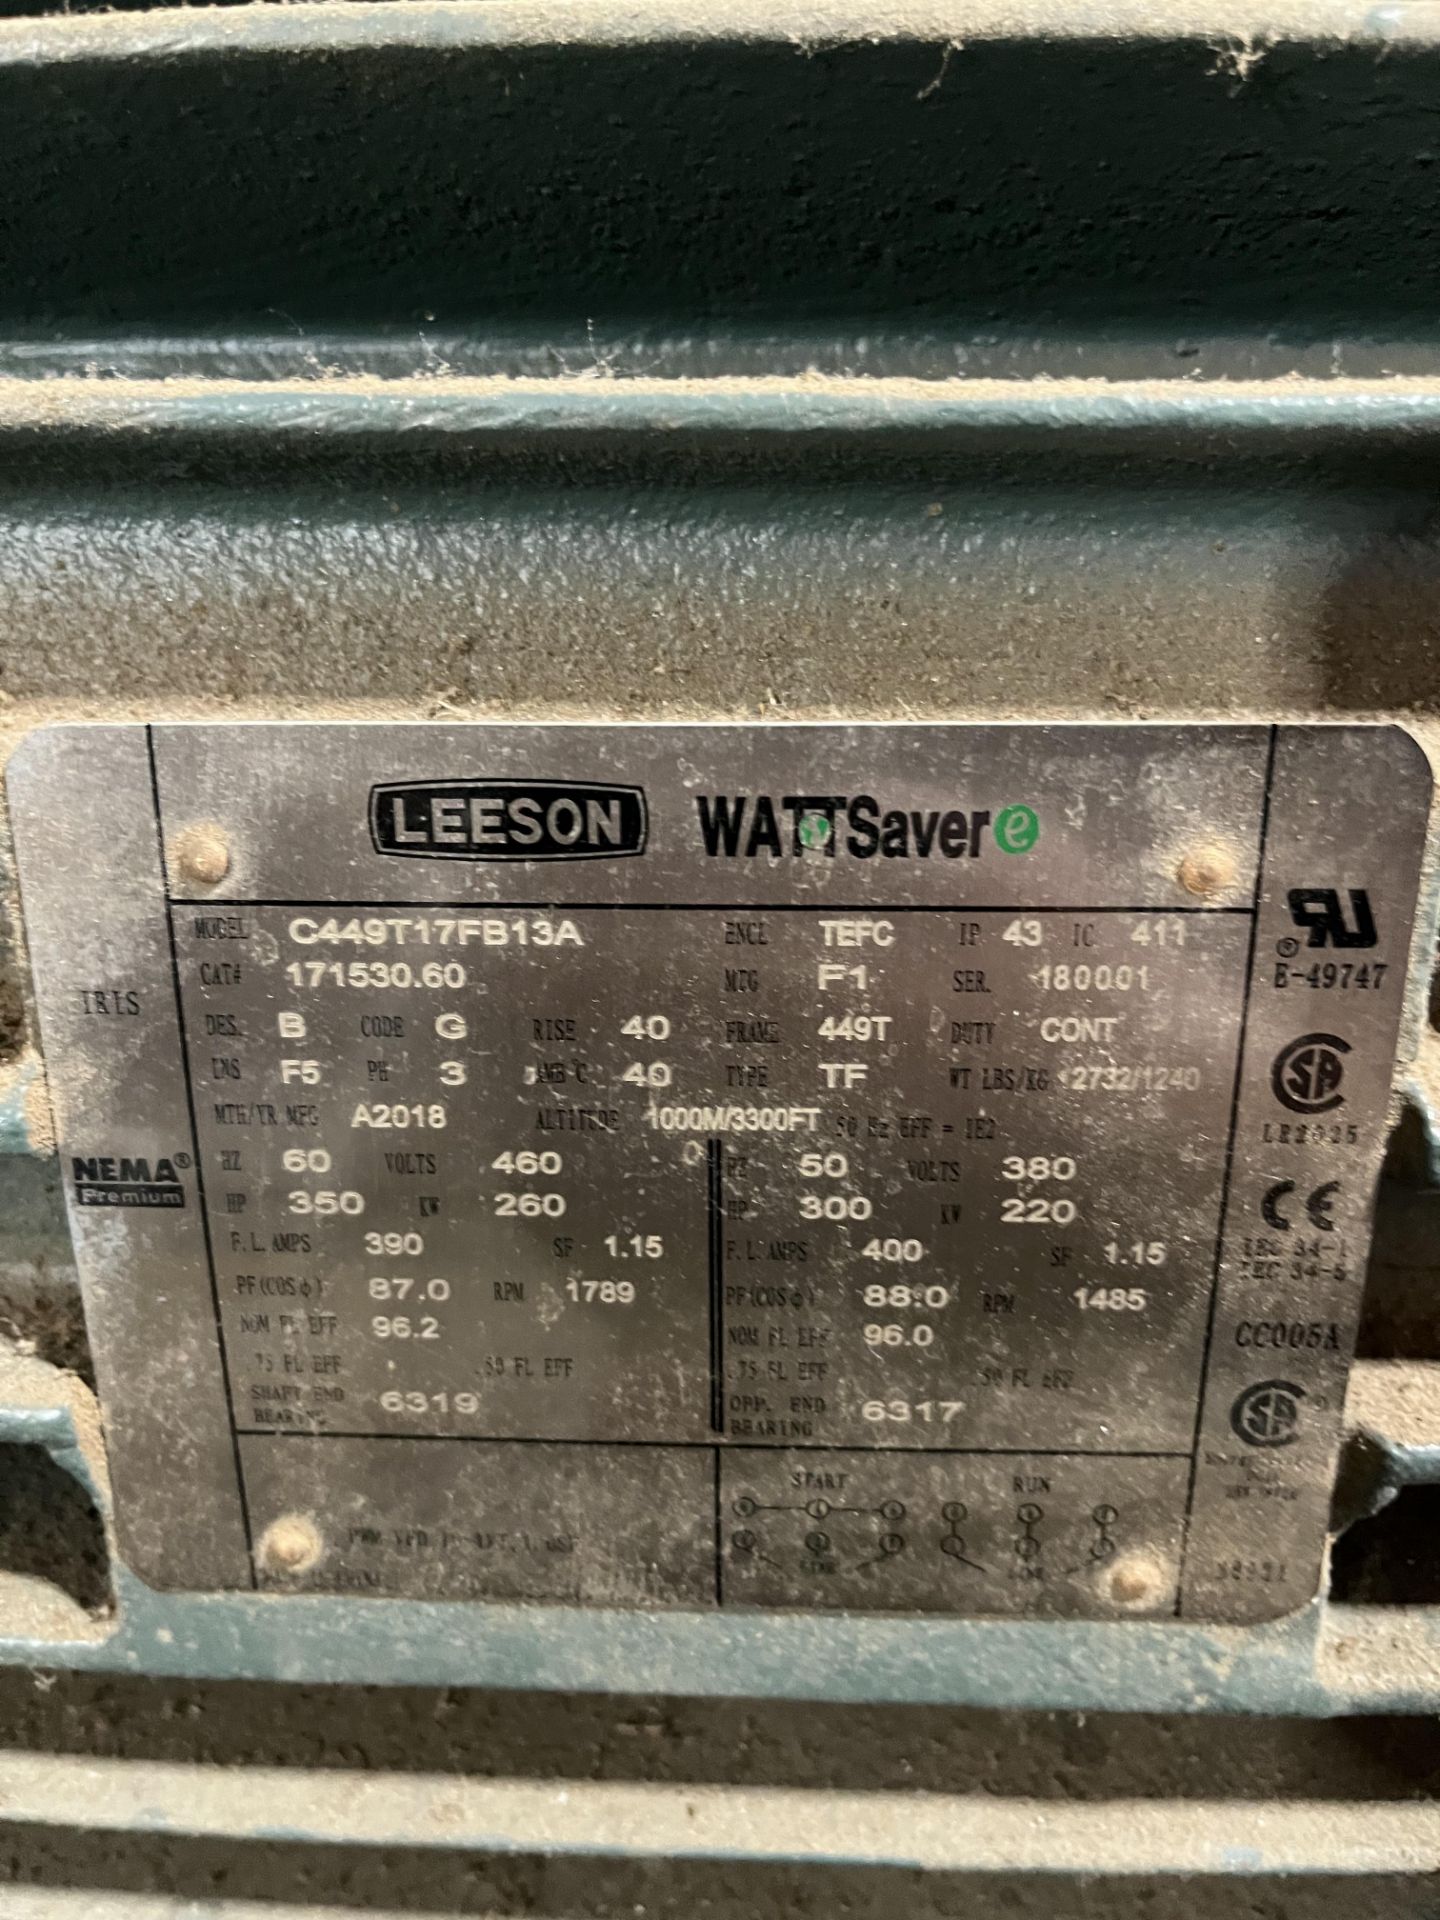 LESSON WATTSAVER 300 HP MOTOR MODEL:C449T17FB13A (Located Freehold, NJ) (Simple Loading Fee $550) - Image 4 of 5